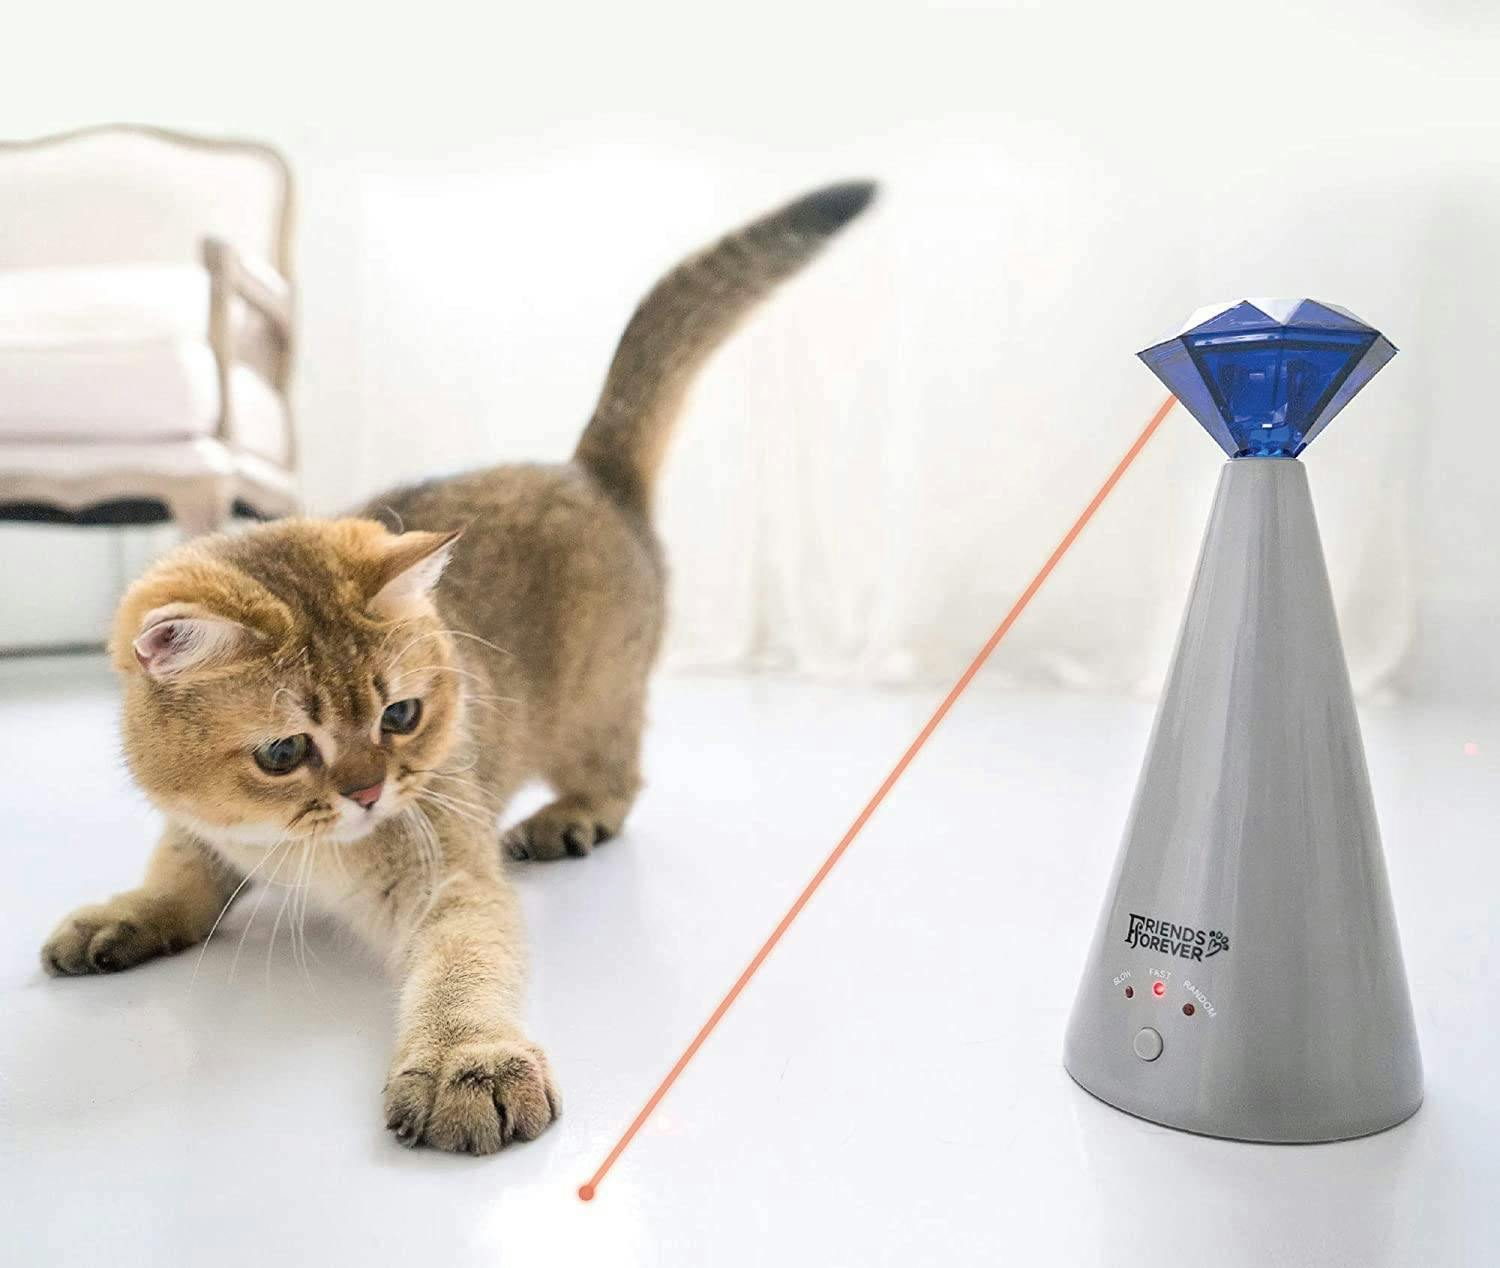 Cat playing with laser toy